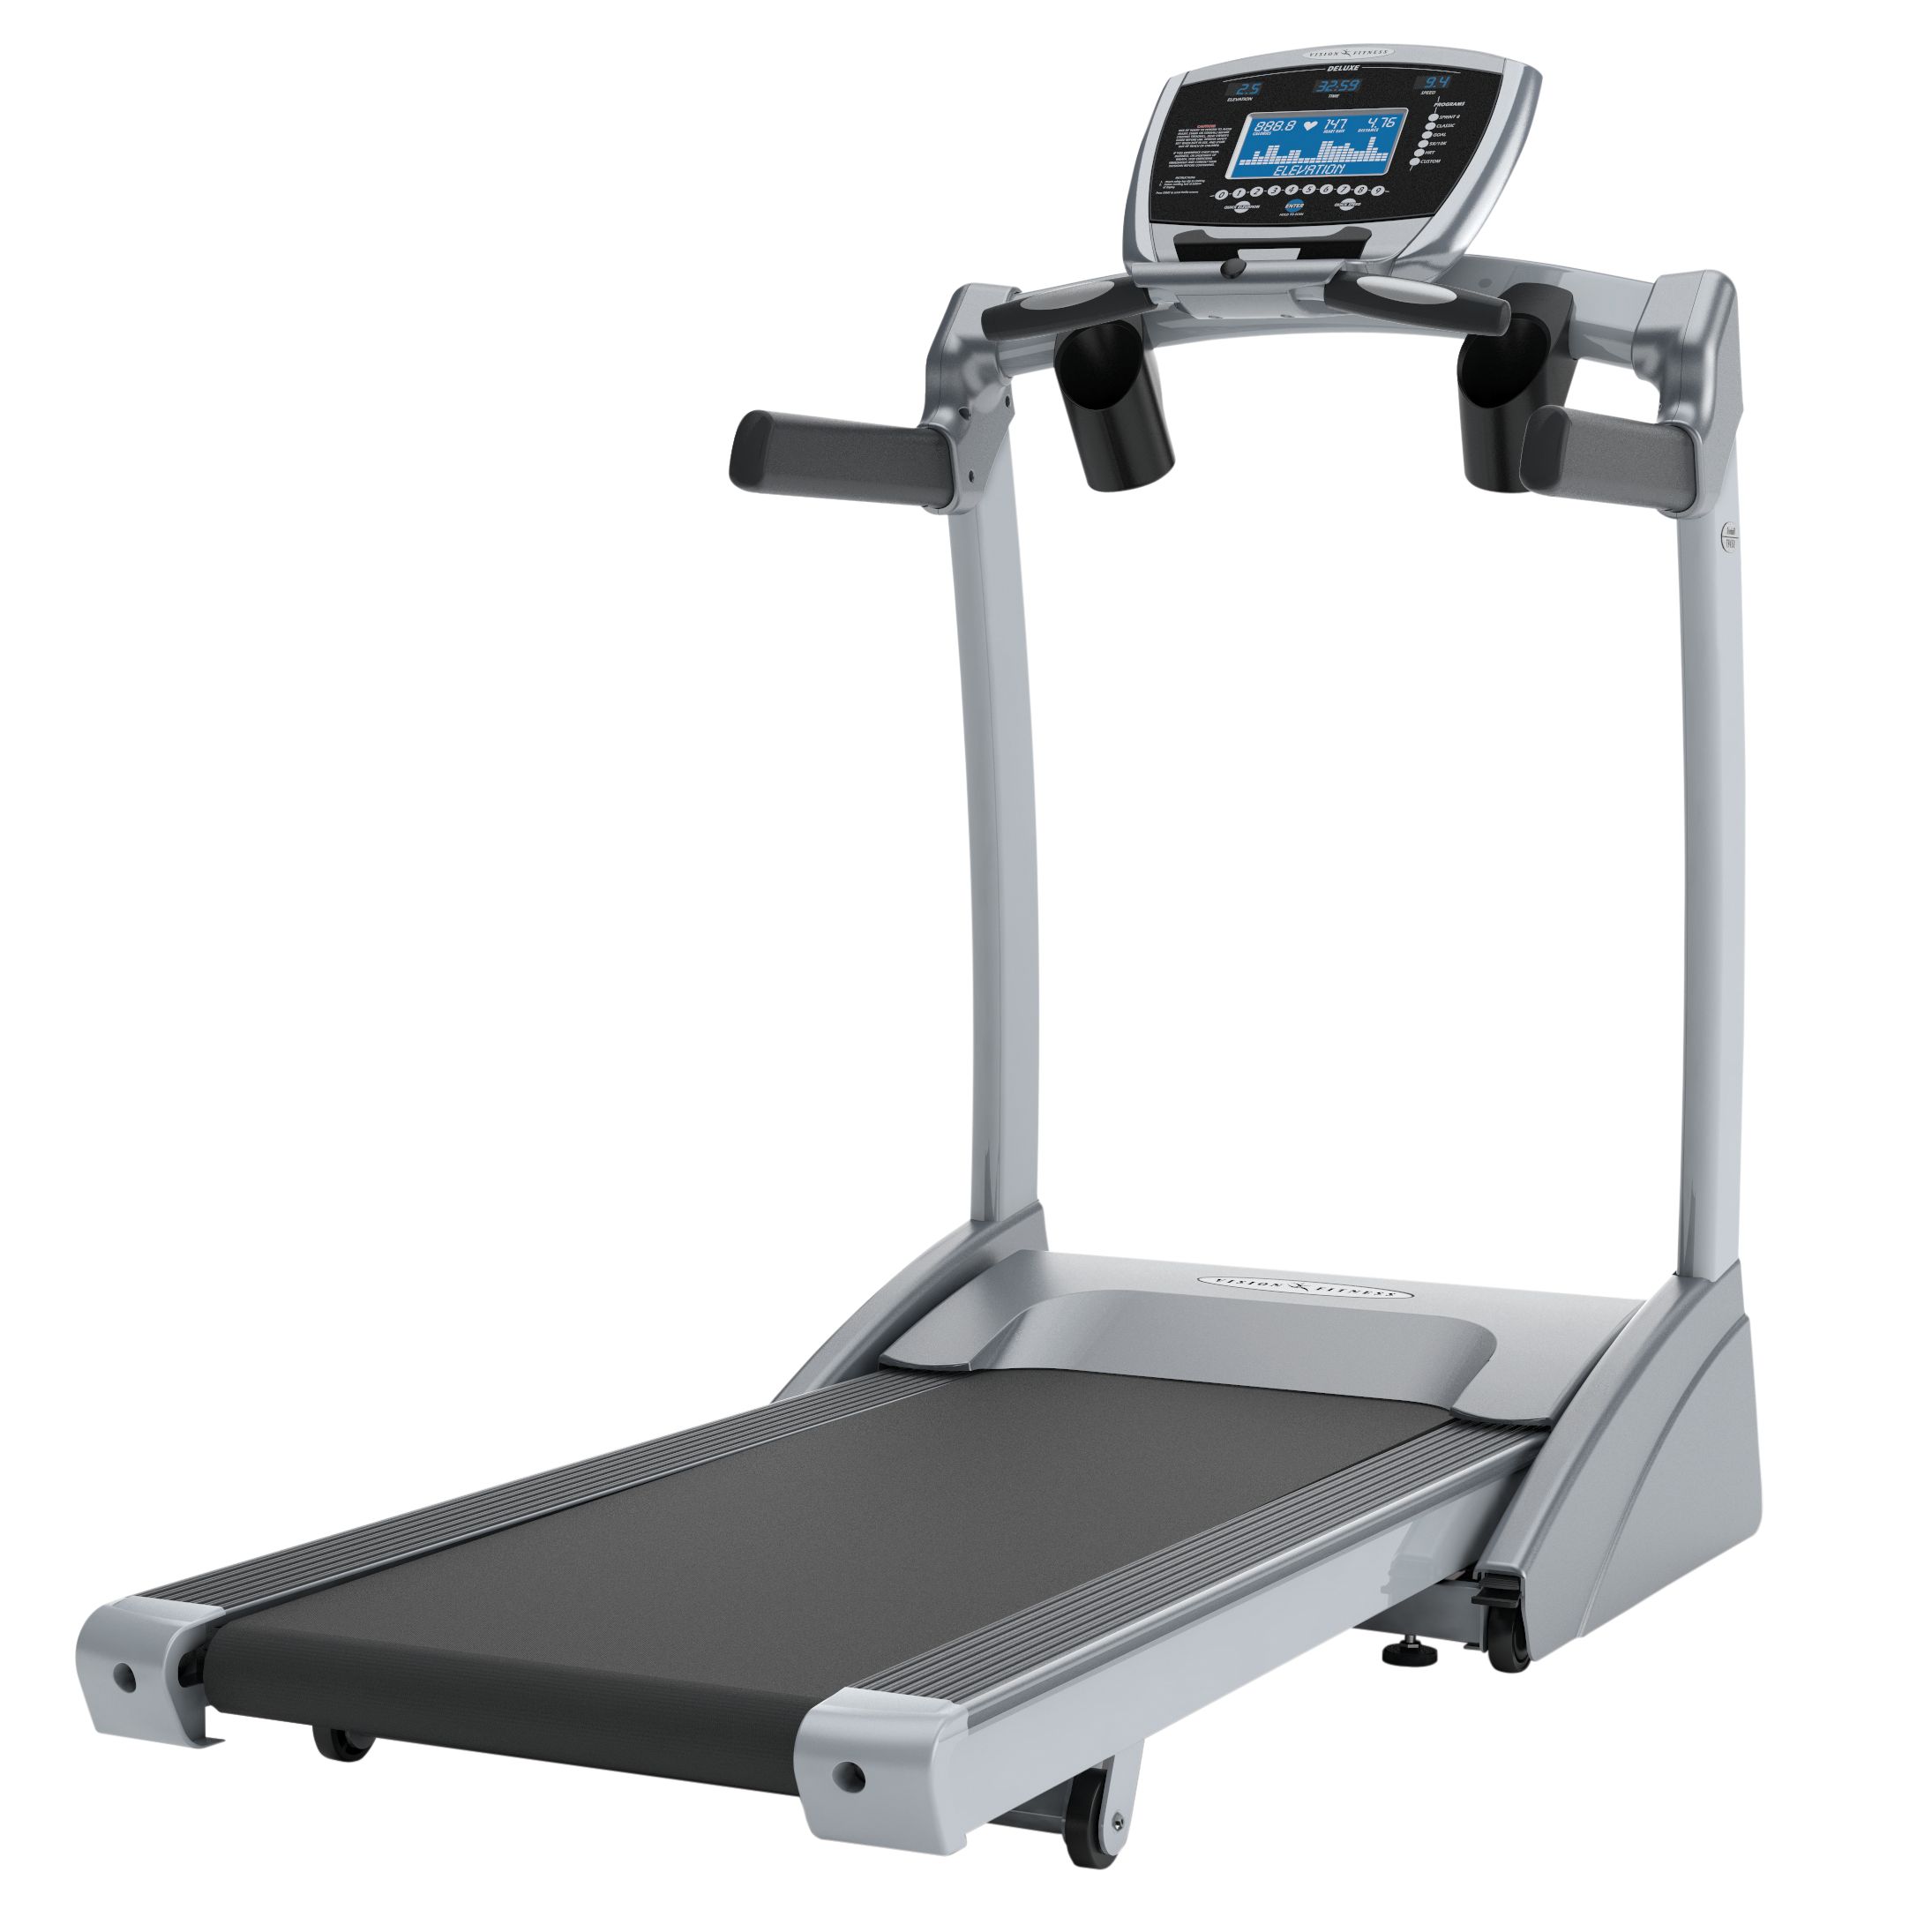 Vision Fitness T9250 Folding Treadmill with Simple Console at John Lewis